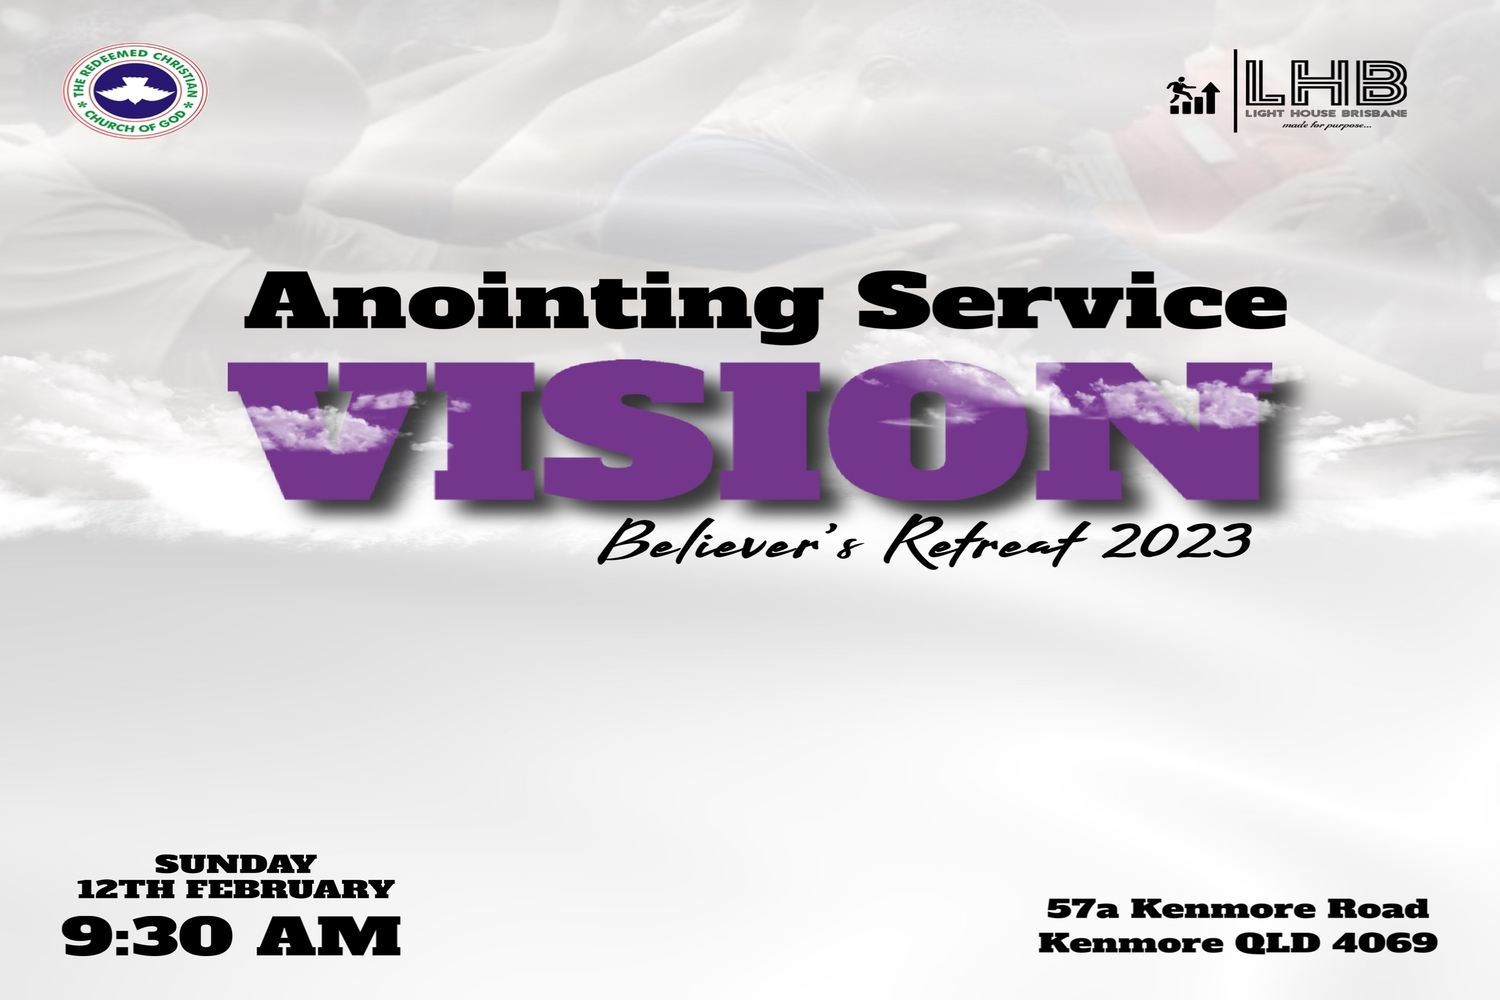 Anointing Service (2023 Believers' Retreat)